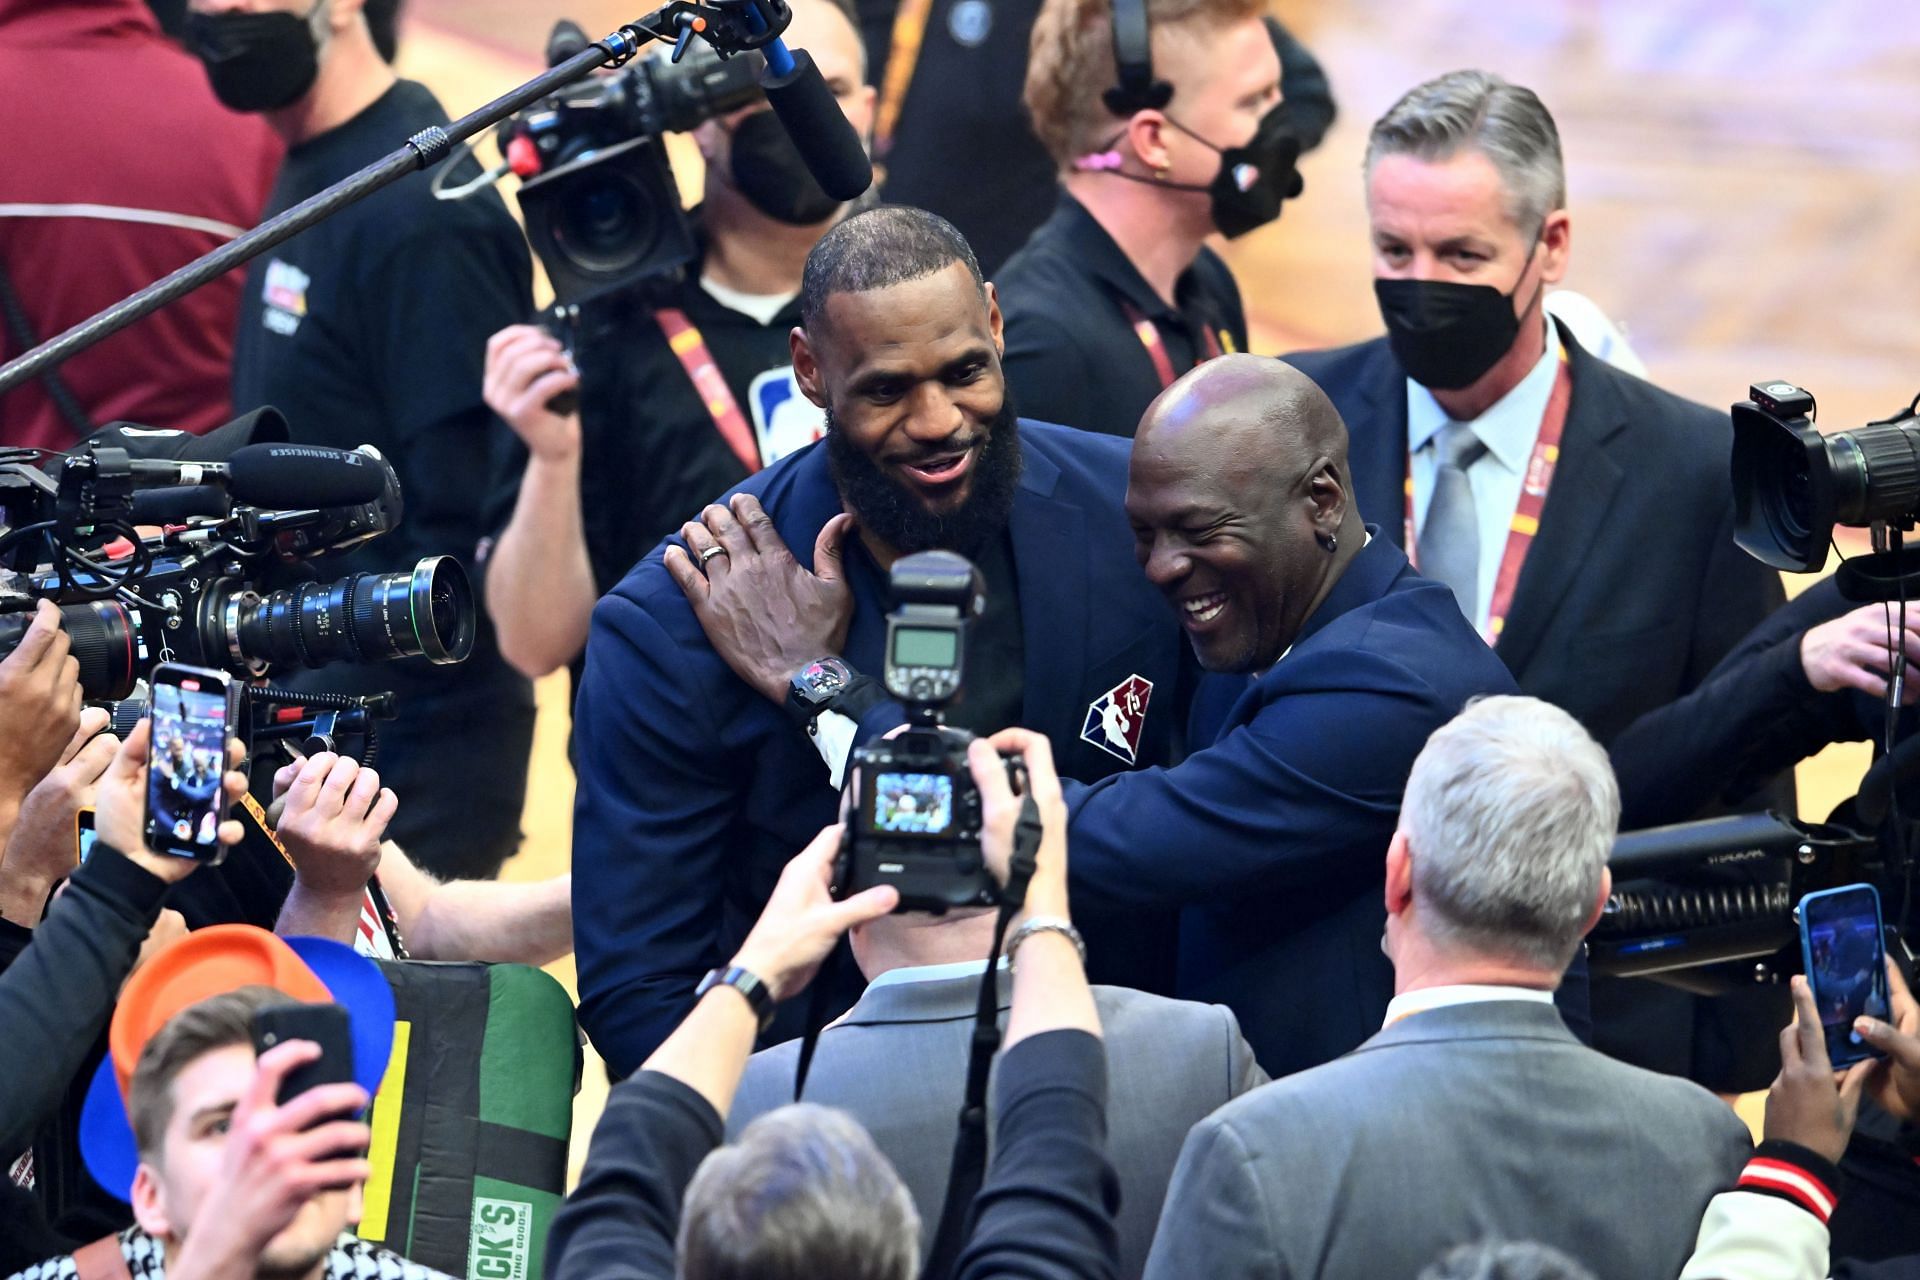 Michael Jordan and LeBron James after the presentation of the NBA 75th Anniversary Team during 2022 All-Star Weekend